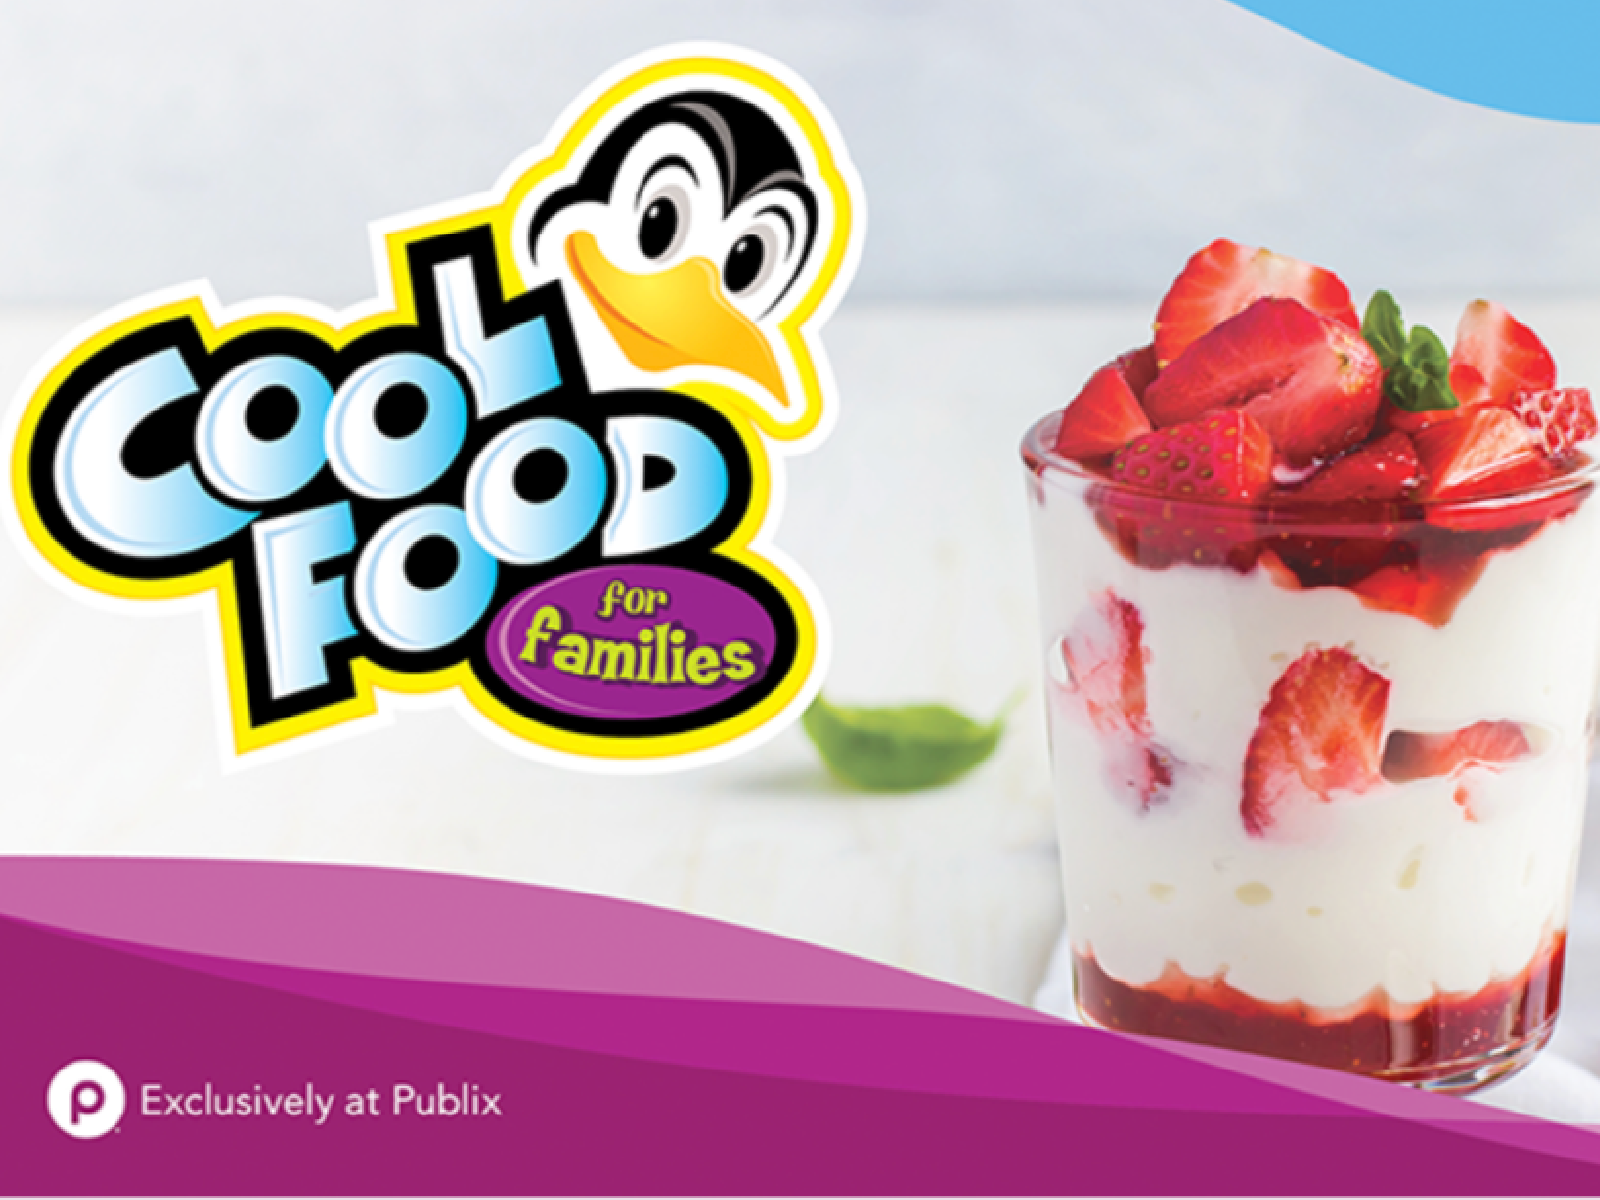 The Cool Food For Families Promo Is Back & Valid Through 3/26 At Publix – Lots Of Great Deals!